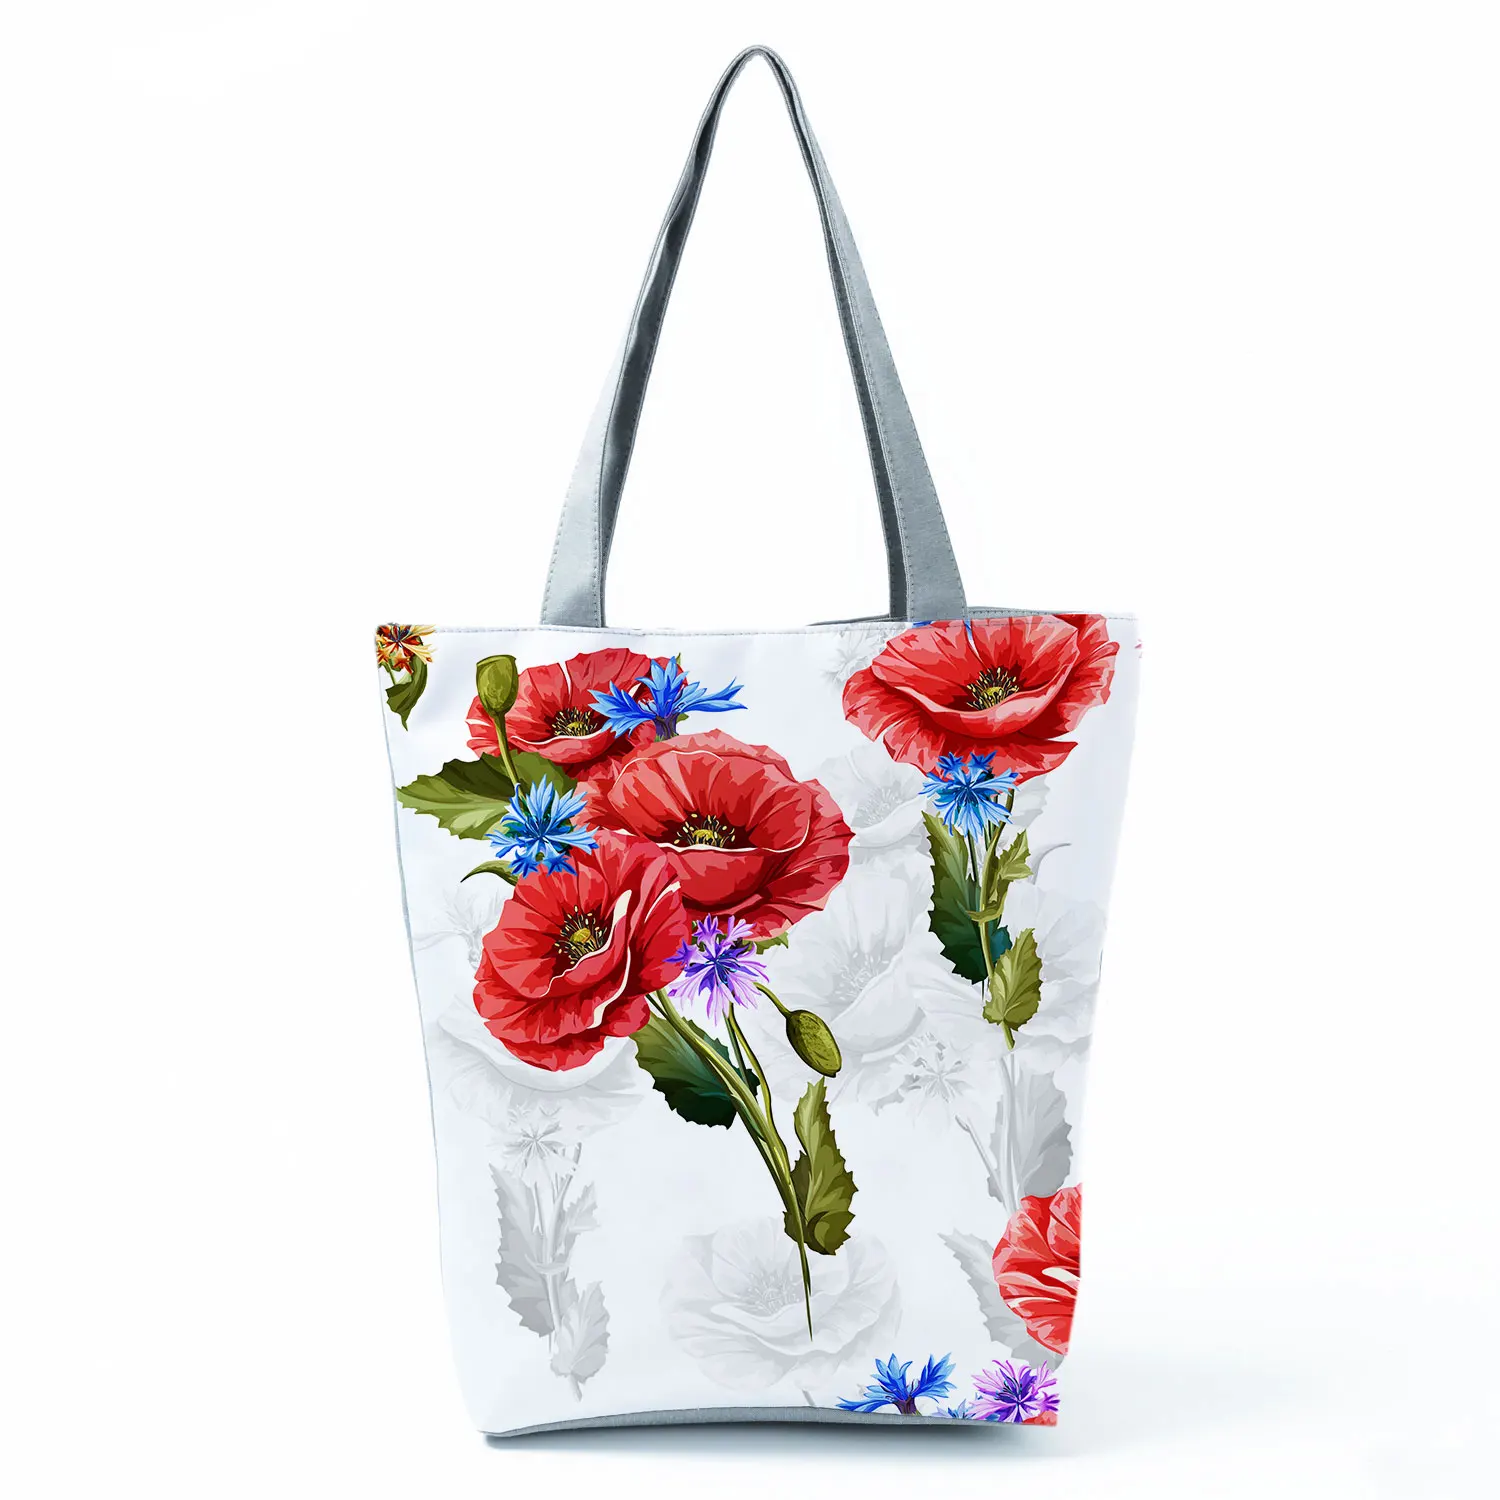 Retro Embroidery Flower Bird Printed Handbags Portable All-match Shoulder Bag Vintage Tote Bag Aesthetic Large Shopper For Wife